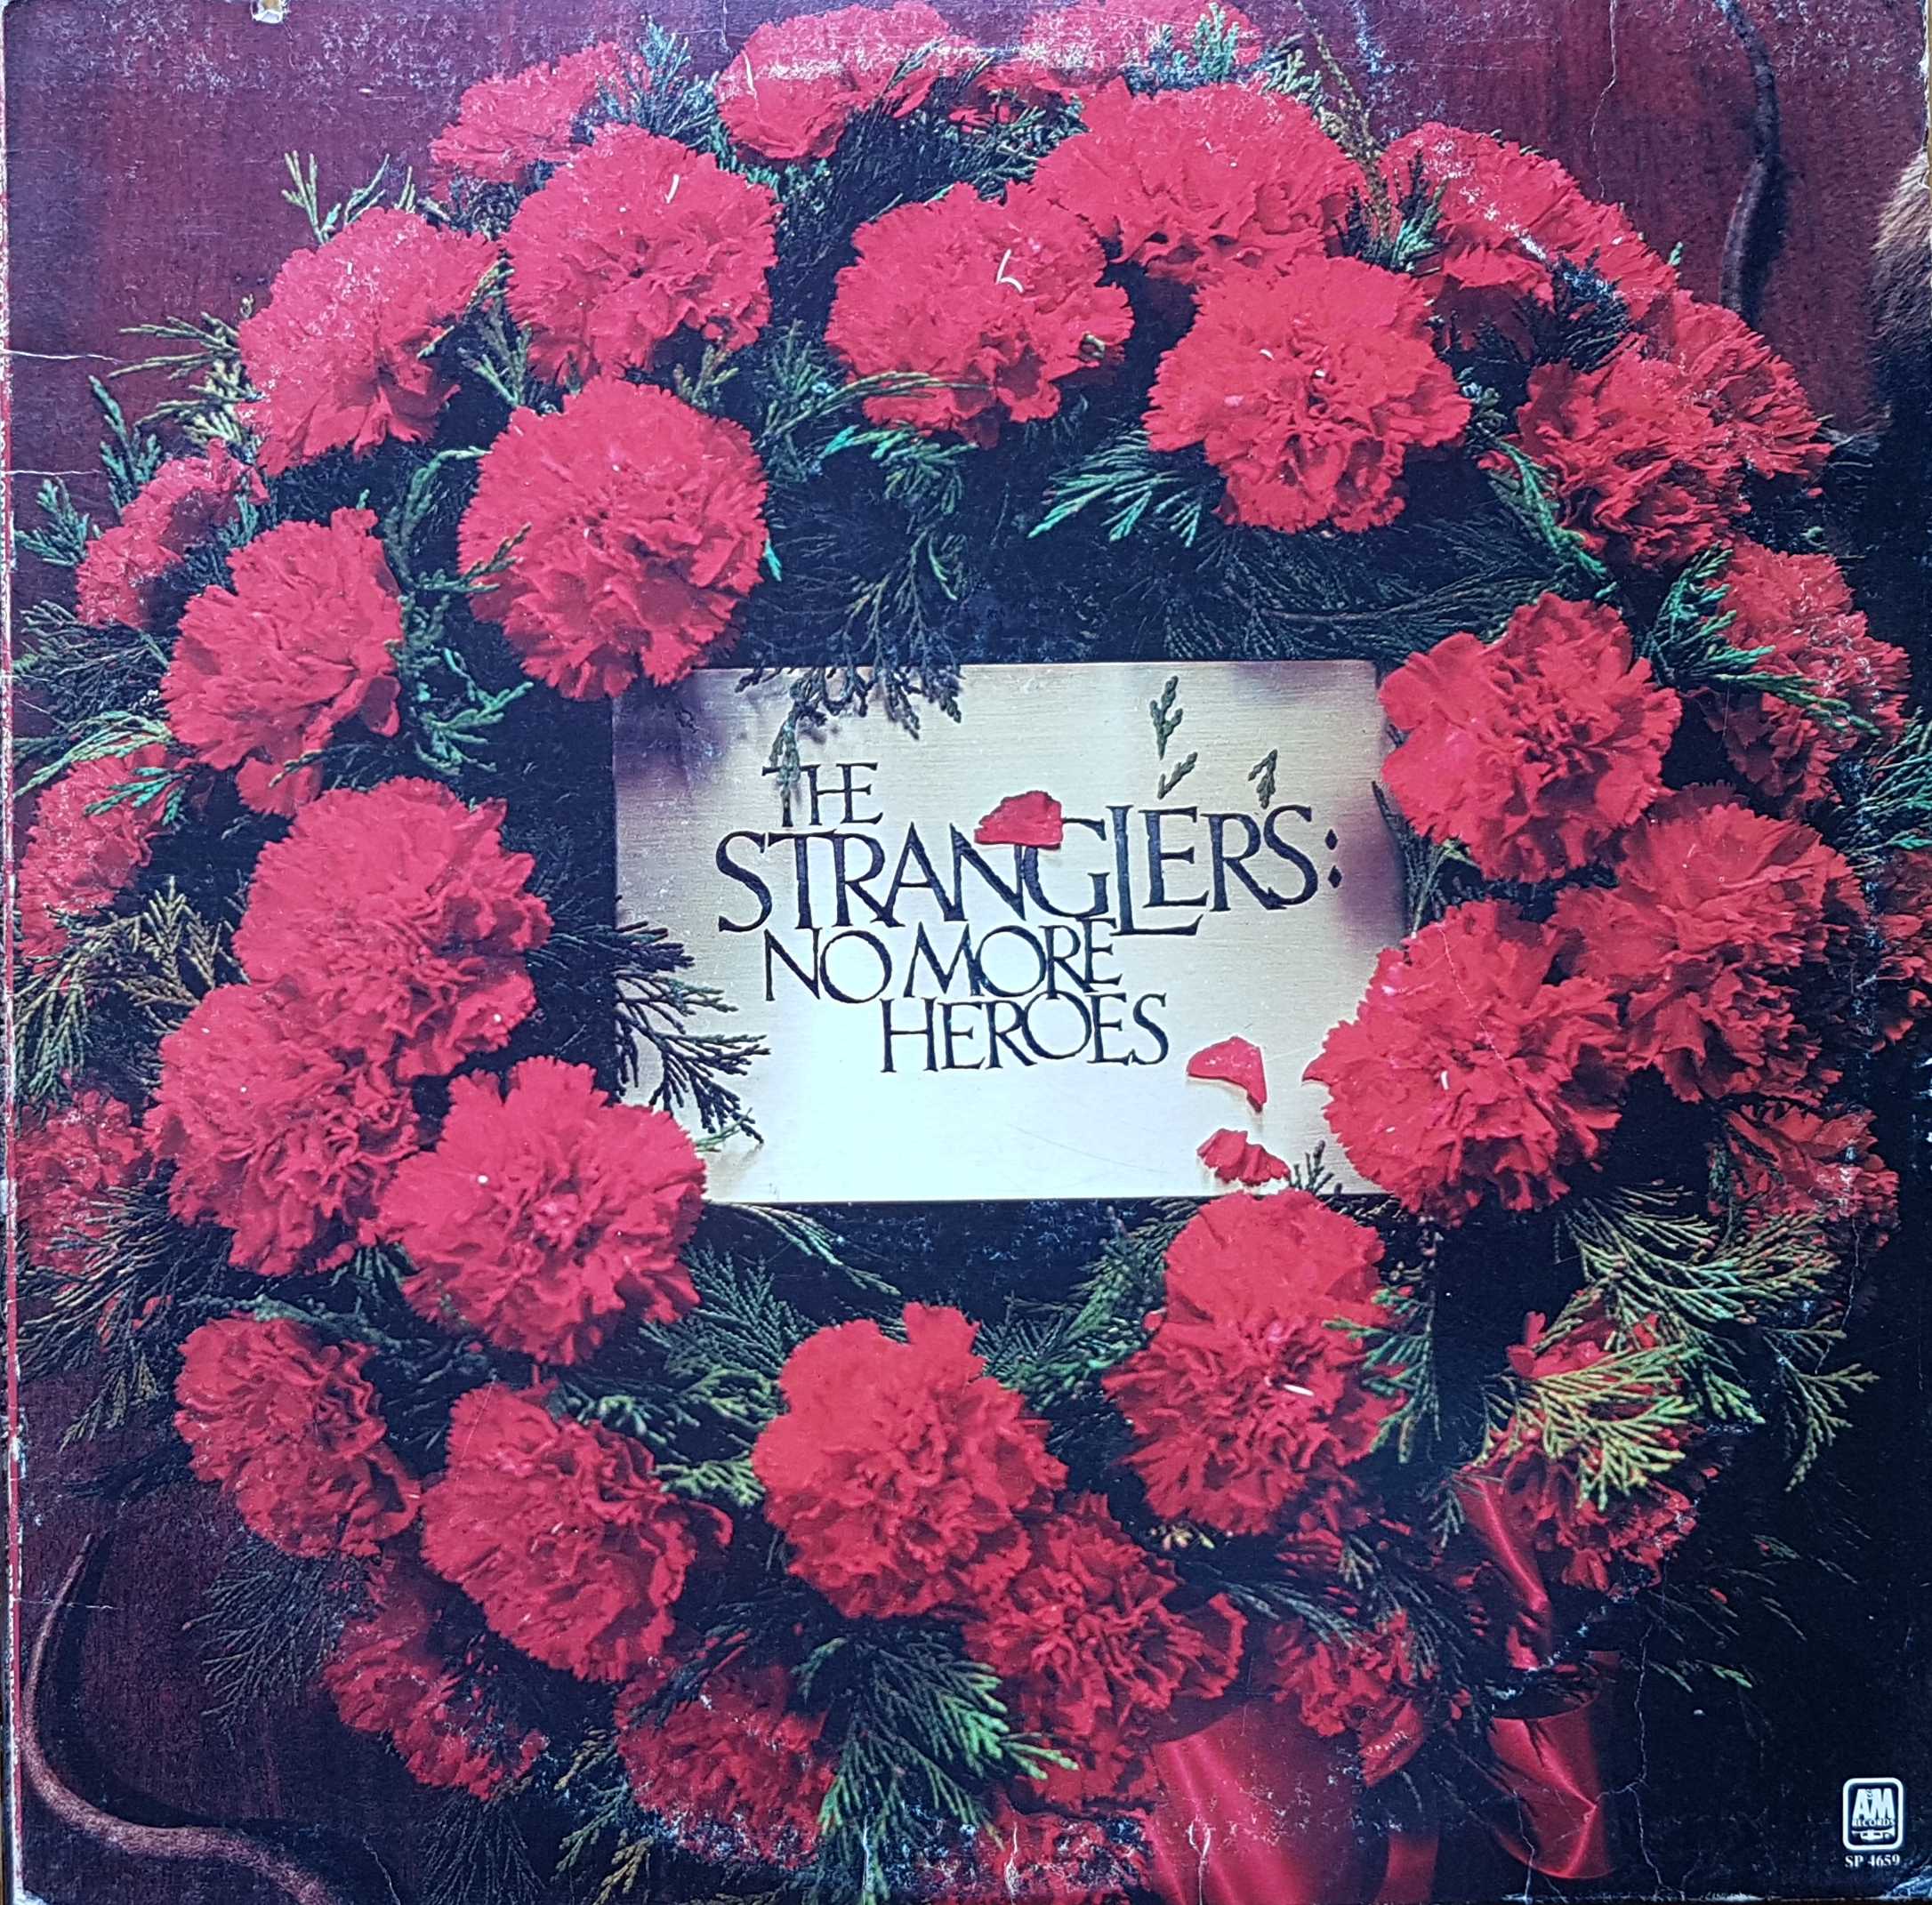 Picture of No more heroes by artist The Stranglers from The Stranglers albums